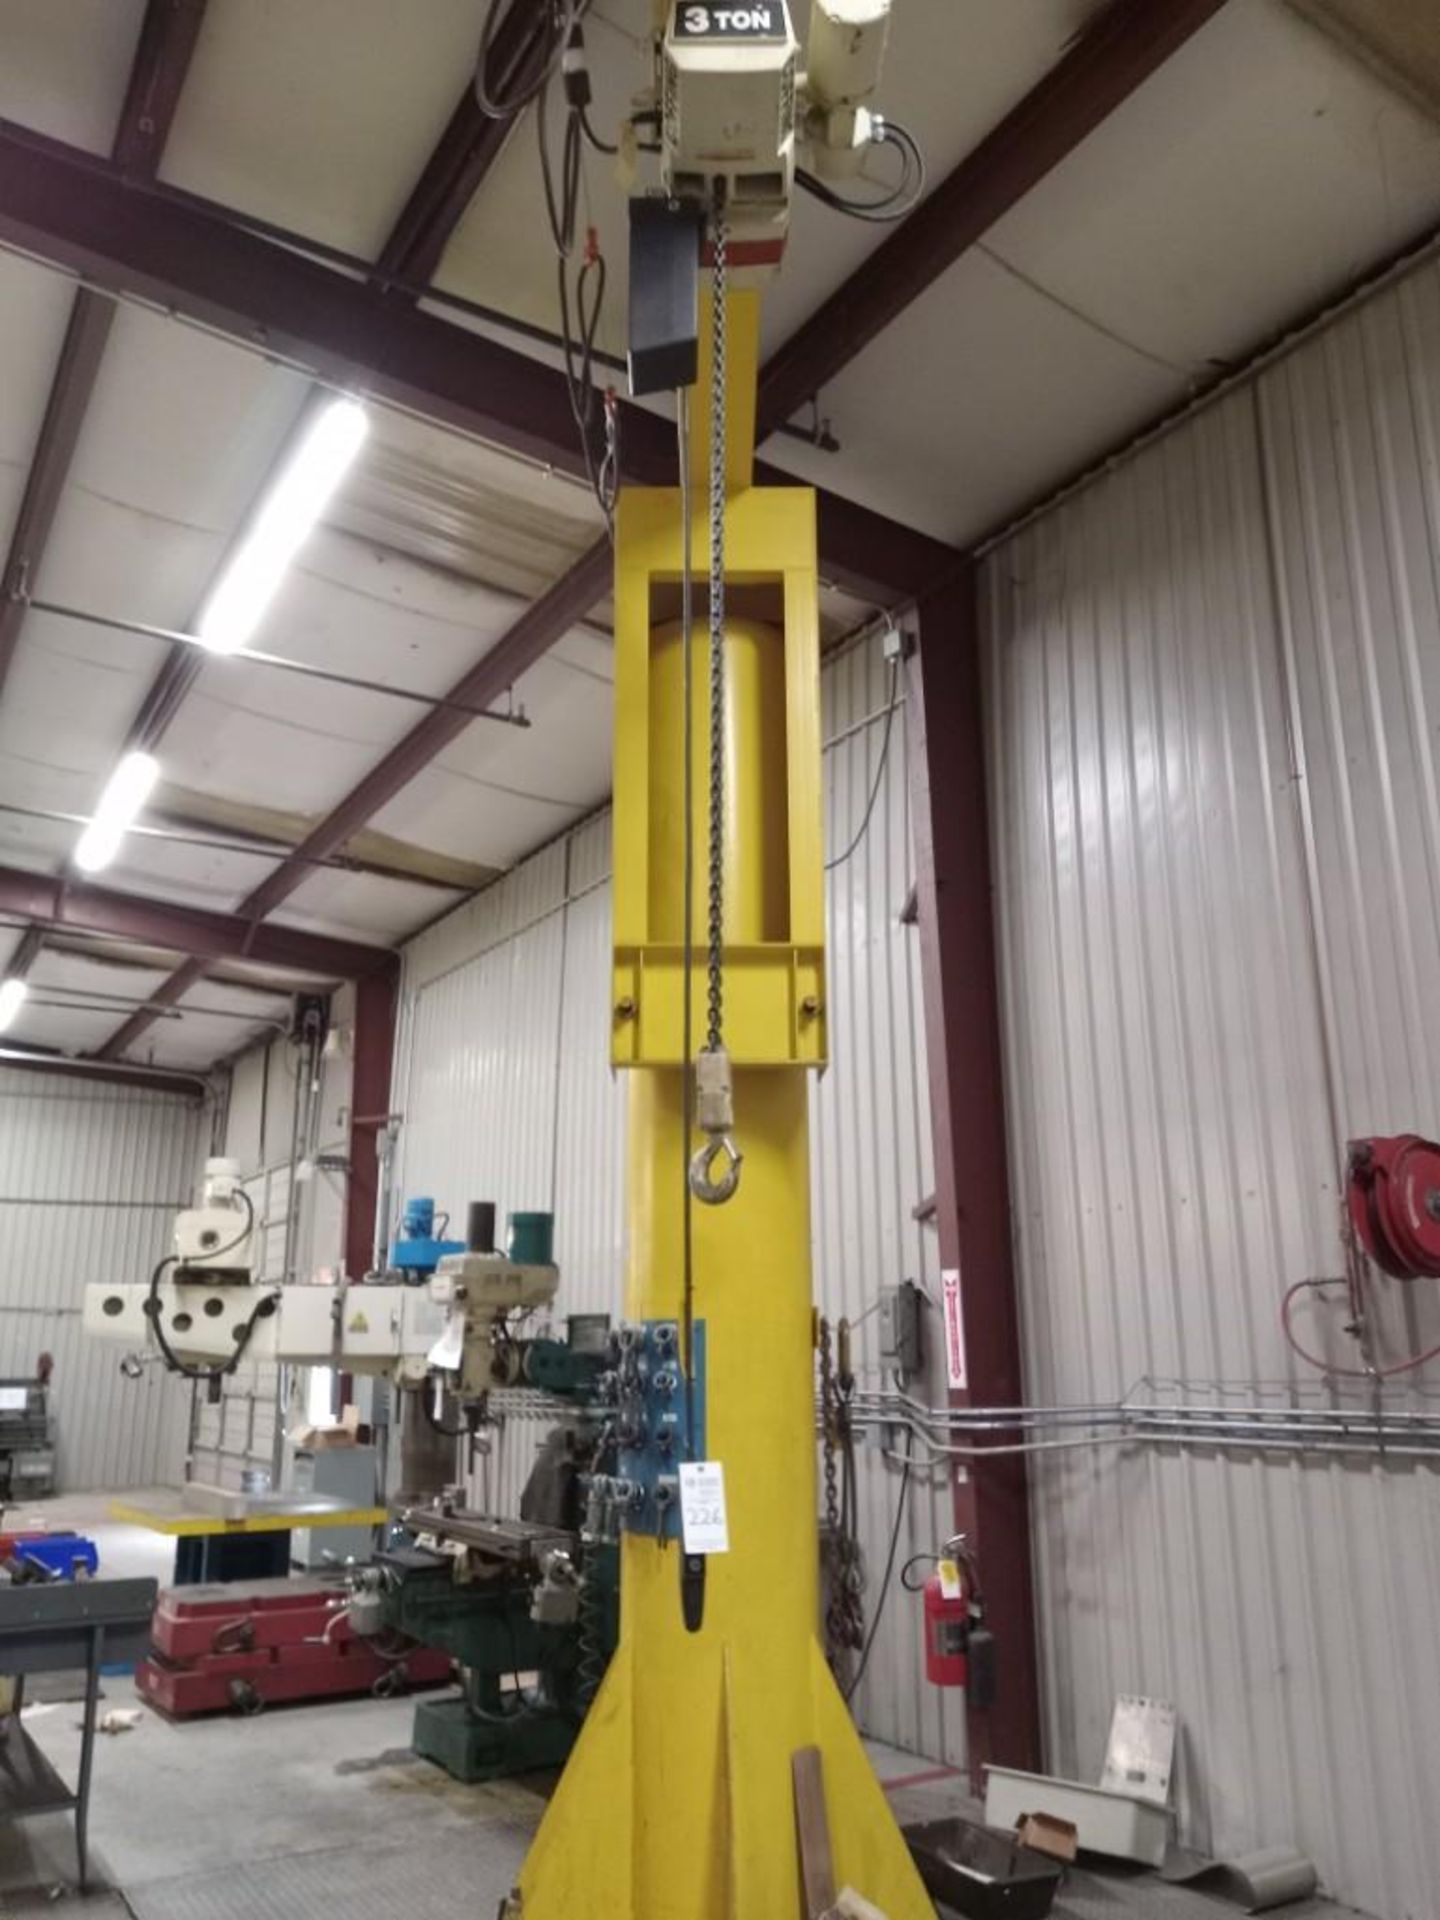 GORBEL 3 TON CRANE AND COFFING ELECTRIC CHAIN HOIST - Image 11 of 12